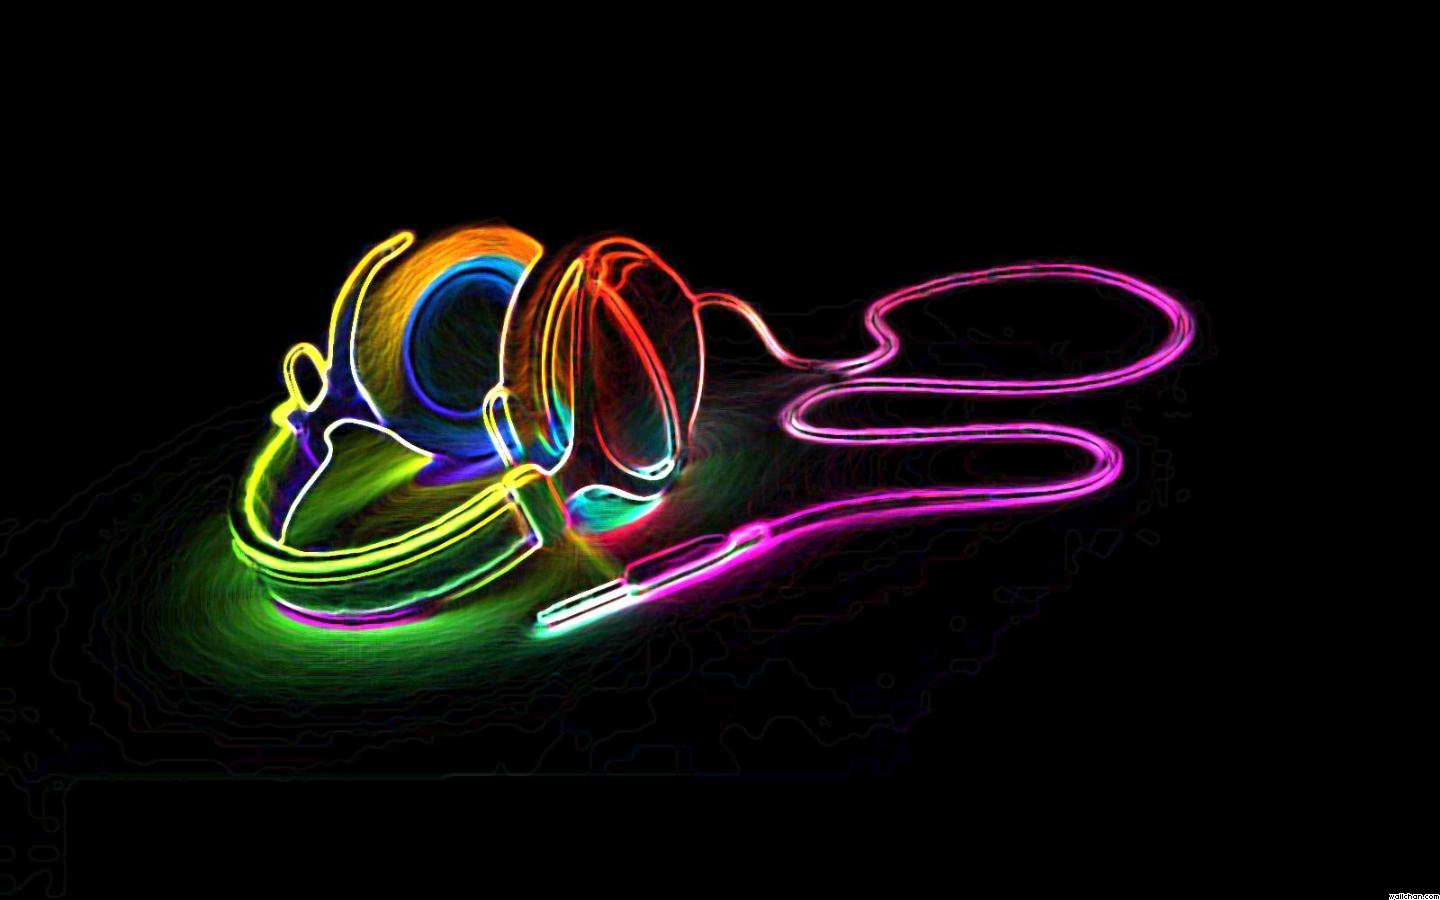 6877-music-neon-psychadelic-wallpapers-hd-download-home-page.jpg